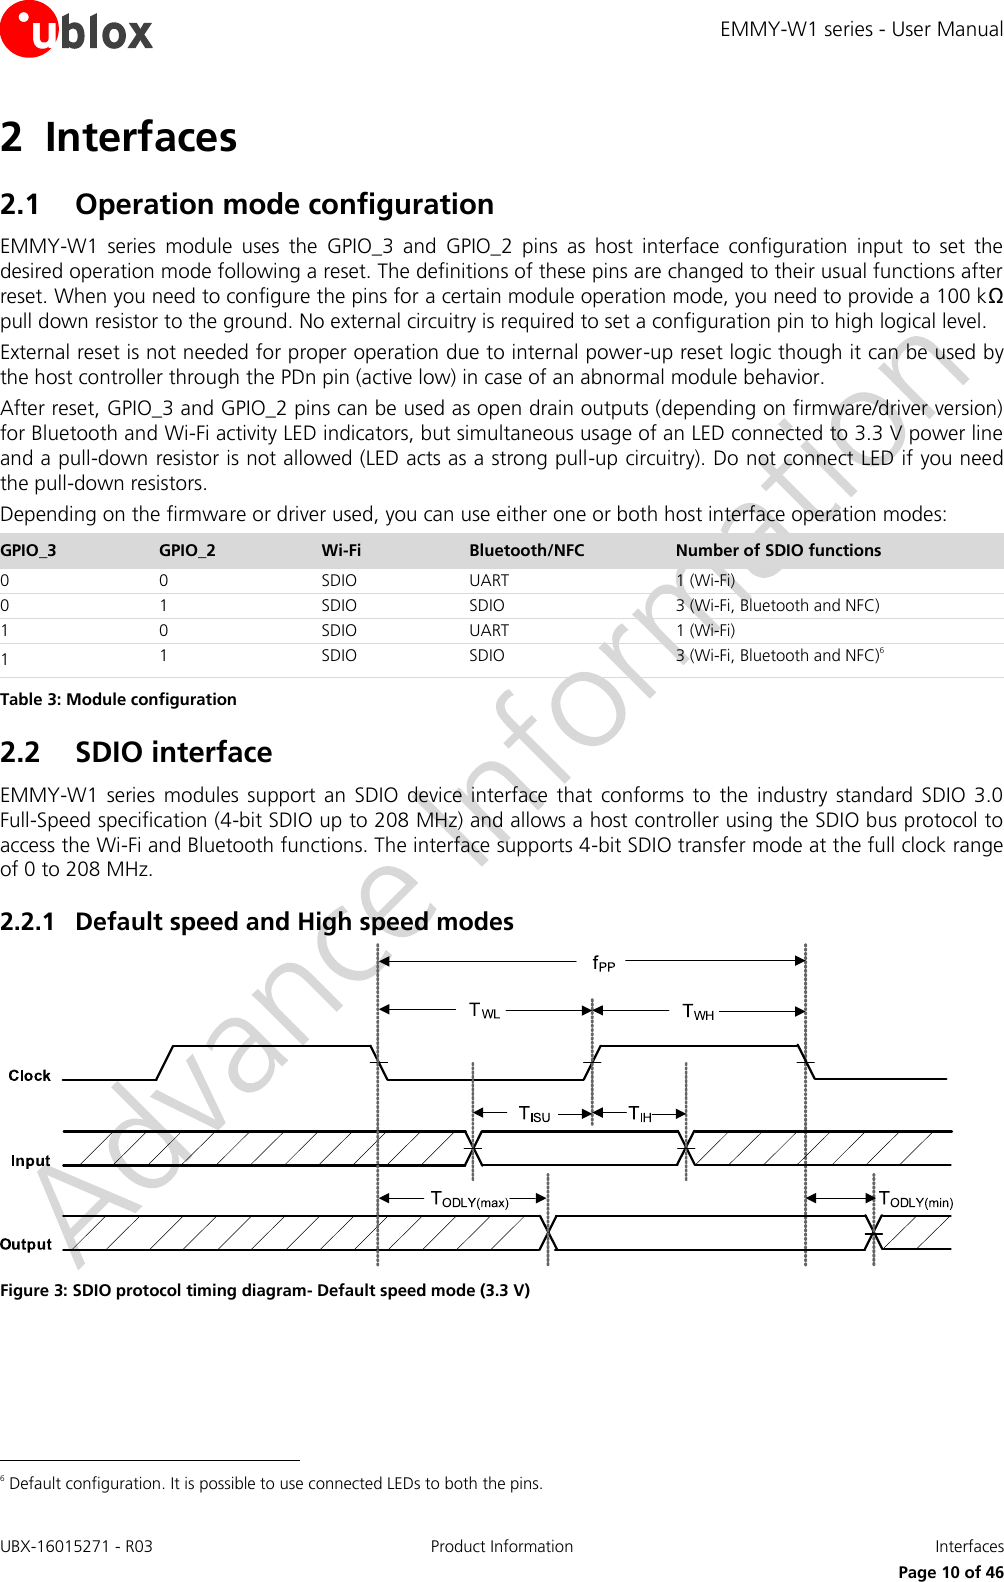 EMMY-W1 series - User Manual UBX-16015271 - R03 Product Information  Interfaces     Page 10 of 46 2 Interfaces 2.1 Operation mode configuration EMMY-W1  series  module  uses  the  GPIO_3  and  GPIO_2  pins  as  host  interface  configuration  input  to  set  the desired operation mode following a reset. The definitions of these pins are changed to their usual functions after reset. When you need to configure the pins for a certain module operation mode, you need to provide a 100 kΩ pull down resistor to the ground. No external circuitry is required to set a configuration pin to high logical level. External reset is not needed for proper operation due to internal power-up reset logic though it can be used by the host controller through the PDn pin (active low) in case of an abnormal module behavior. After reset, GPIO_3 and GPIO_2 pins can be used as open drain outputs (depending on firmware/driver version) for Bluetooth and Wi-Fi activity LED indicators, but simultaneous usage of an LED connected to 3.3 V power line and a pull-down resistor is not allowed (LED acts as a strong pull-up circuitry). Do not connect LED if you need the pull-down resistors. Depending on the firmware or driver used, you can use either one or both host interface operation modes: GPIO_3 GPIO_2 Wi-Fi Bluetooth/NFC Number of SDIO functions 0 0 SDIO UART 1 (Wi-Fi) 0 1 SDIO SDIO 3 (Wi-Fi, Bluetooth and NFC) 1 0 SDIO UART 1 (Wi-Fi) 1 1 SDIO SDIO 3 (Wi-Fi, Bluetooth and NFC)6 Table 3: Module configuration 2.2 SDIO interface EMMY-W1  series  modules  support  an  SDIO  device  interface that  conforms  to  the  industry  standard  SDIO  3.0  Full-Speed specification (4-bit SDIO up to 208 MHz) and allows a host controller using the SDIO bus protocol to access the Wi-Fi and Bluetooth functions. The interface supports 4-bit SDIO transfer mode at the full clock range of 0 to 208 MHz. 2.2.1 Default speed and High speed modes  Figure 3: SDIO protocol timing diagram- Default speed mode (3.3 V)                                                       6 Default configuration. It is possible to use connected LEDs to both the pins. 